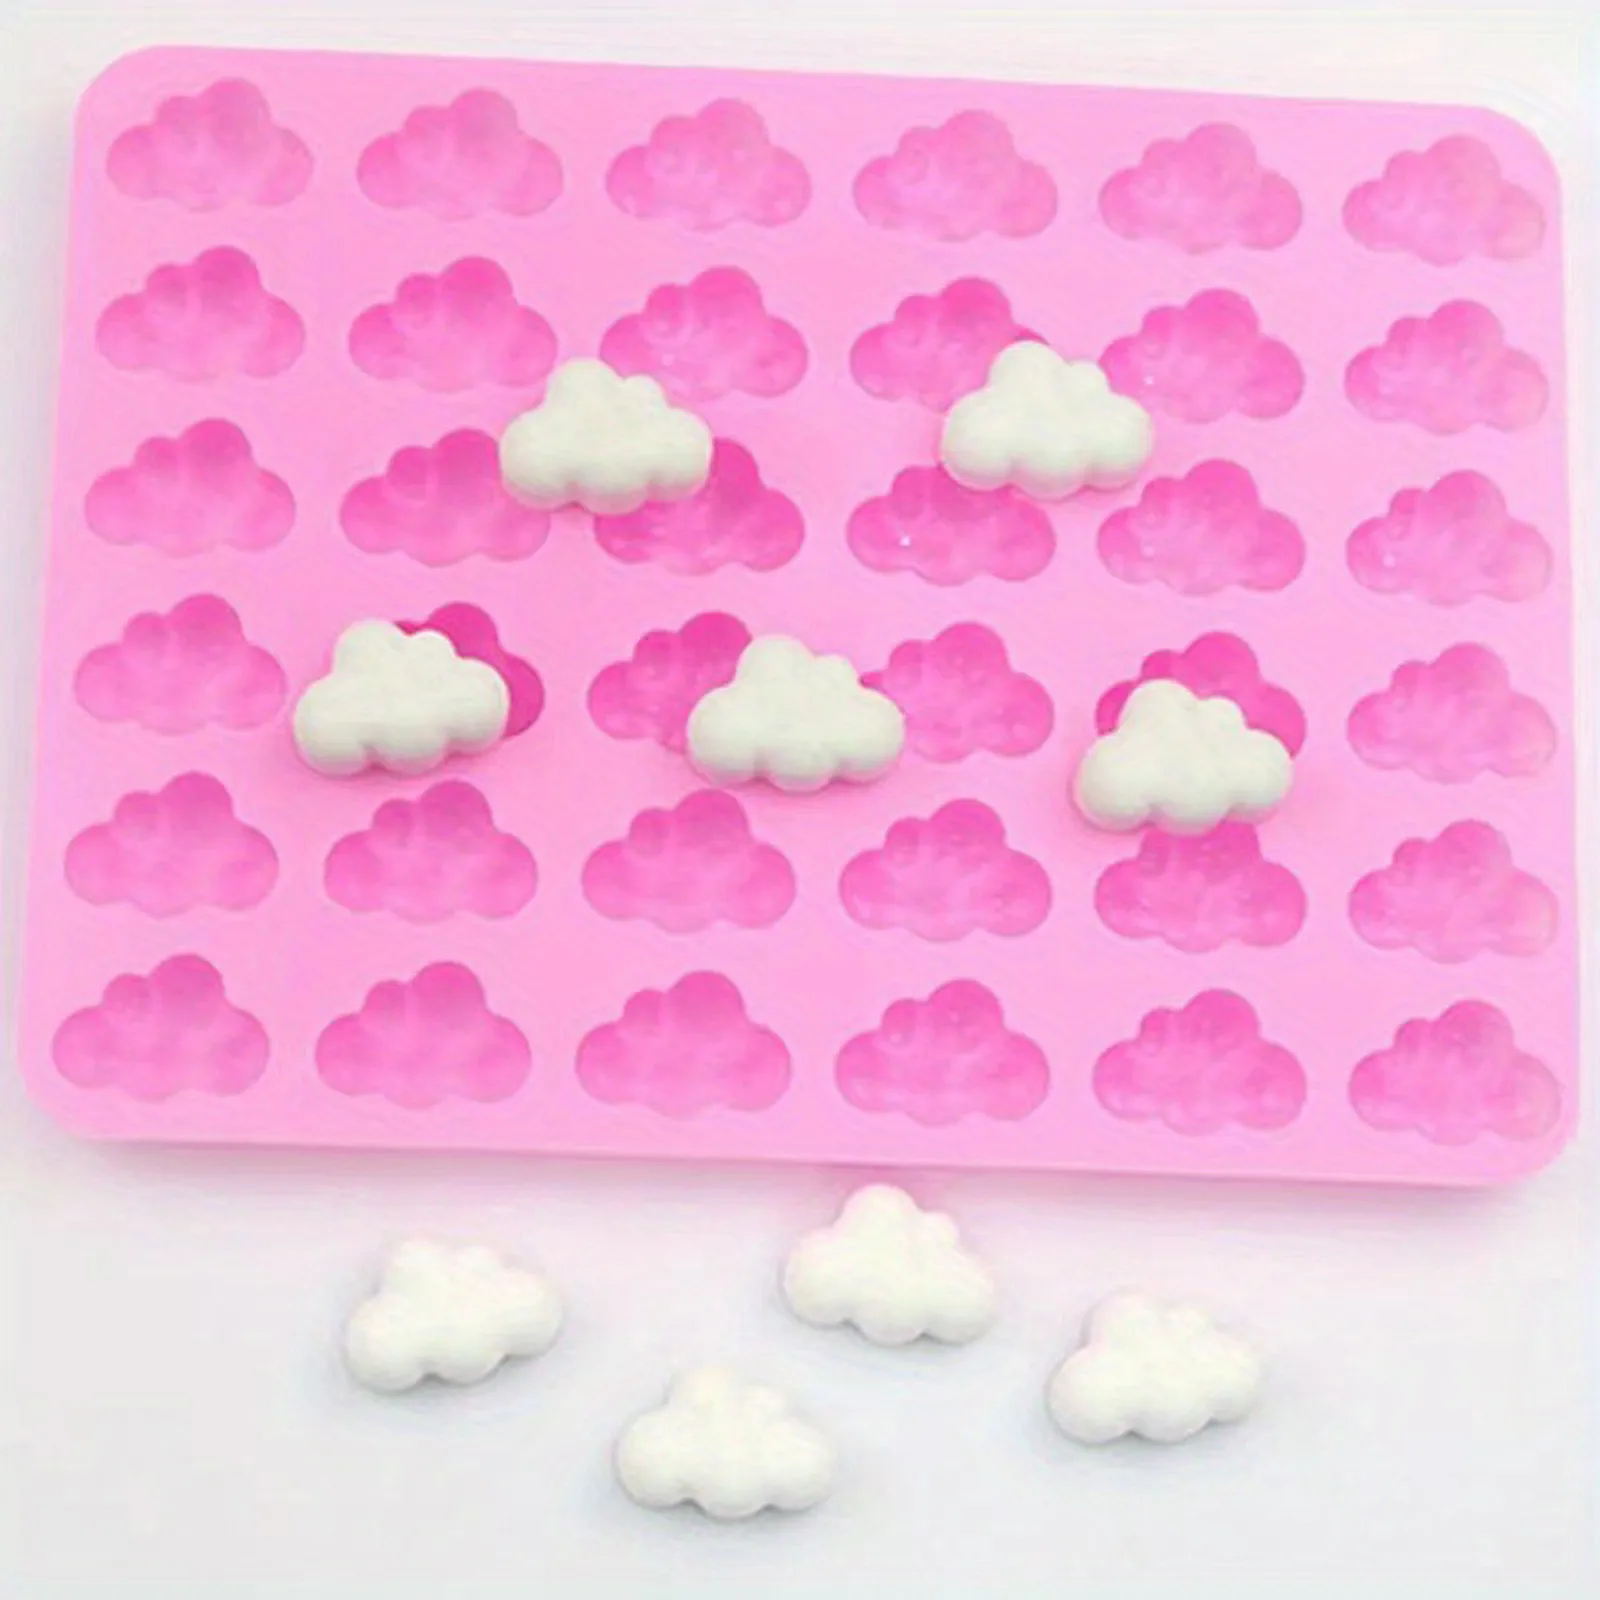 

Cloud Shape Biscuit Molds Kitchen Baking Gadget Candy Ice Cookie Moulds Silicone Food Grade Chocolate Cake Candy Lollipop Molds